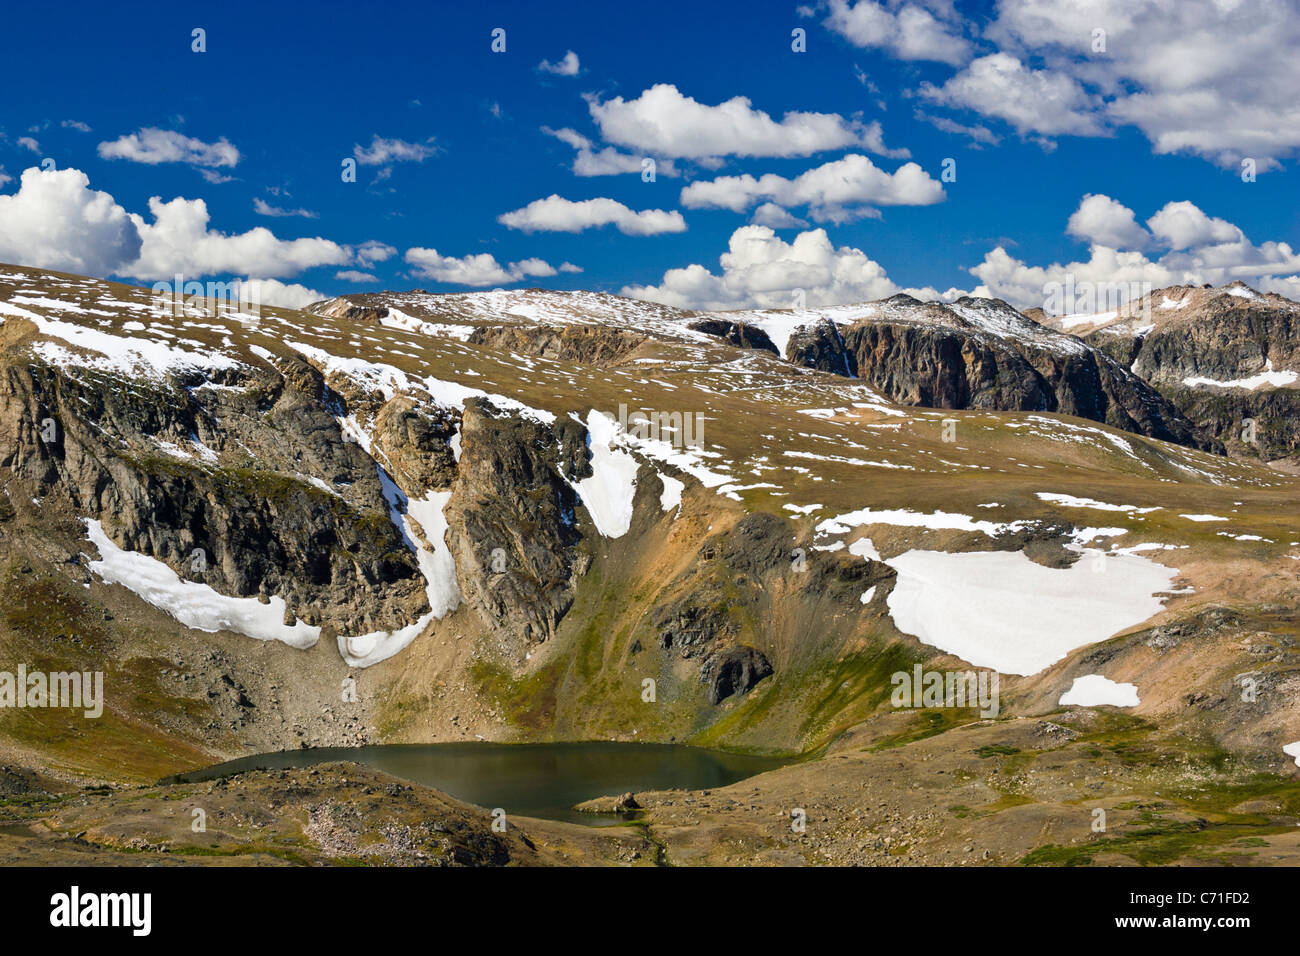 Beartooth Highway, scenic byway, which passes through Beartooth mountain peaks at 11,000 feet between Wyoming and Montana. Stock Photo